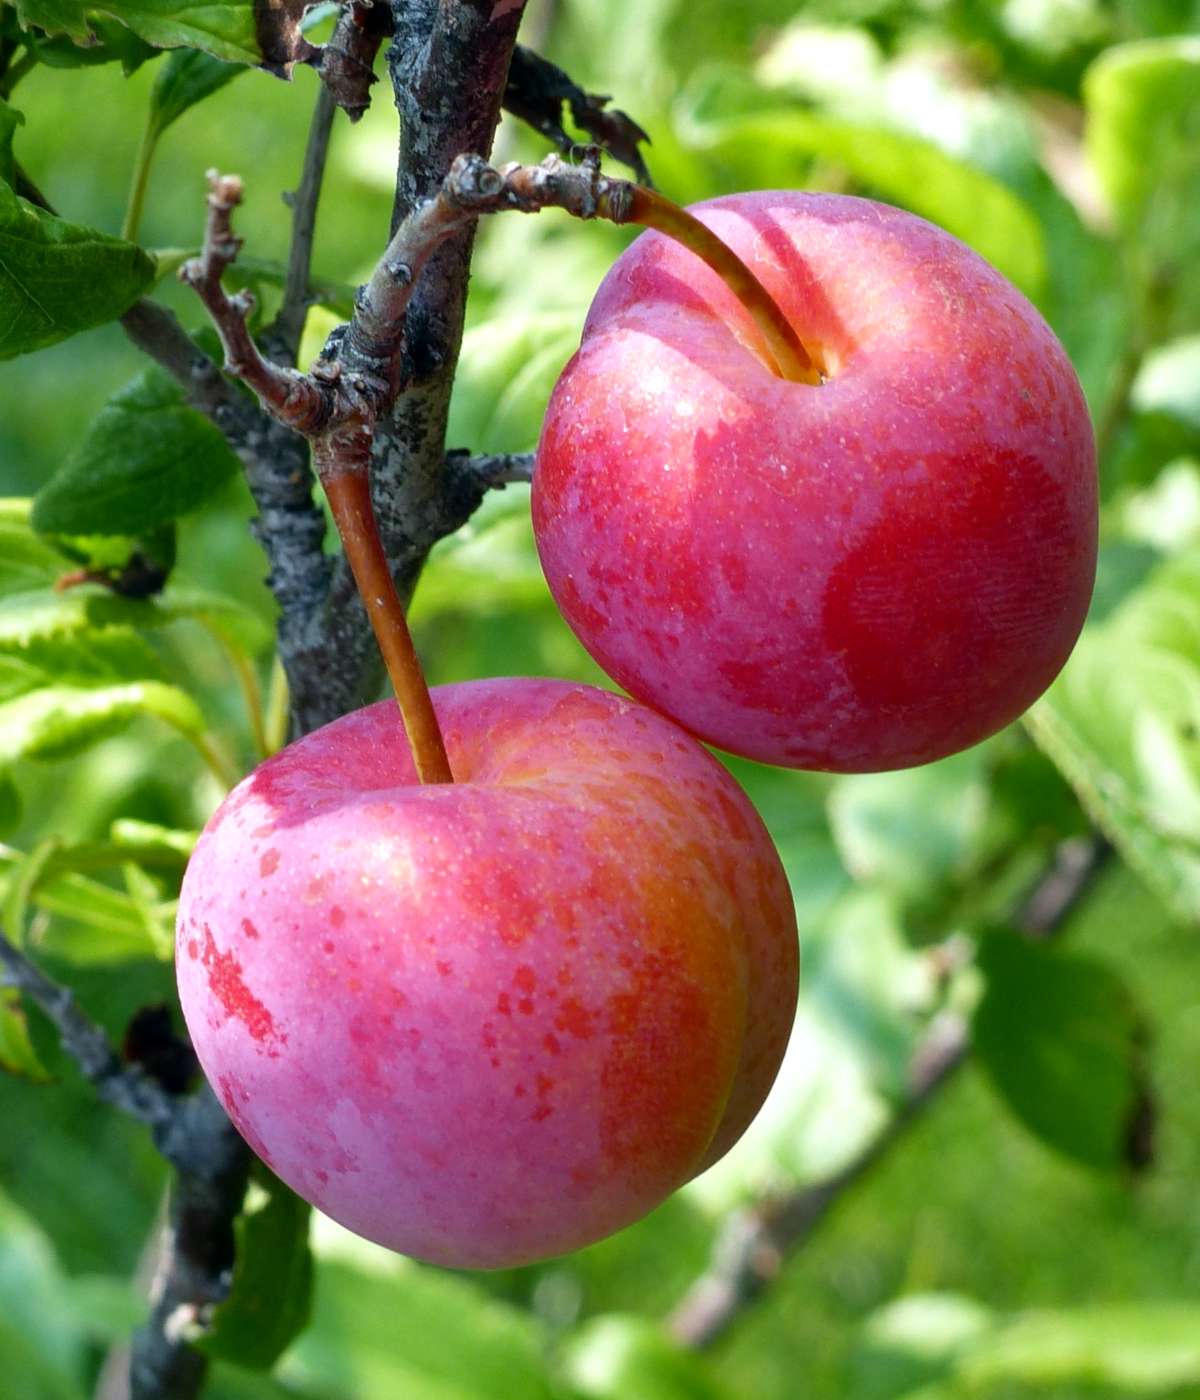 Can You Eat Plums From An Ornamental Plum Tree?